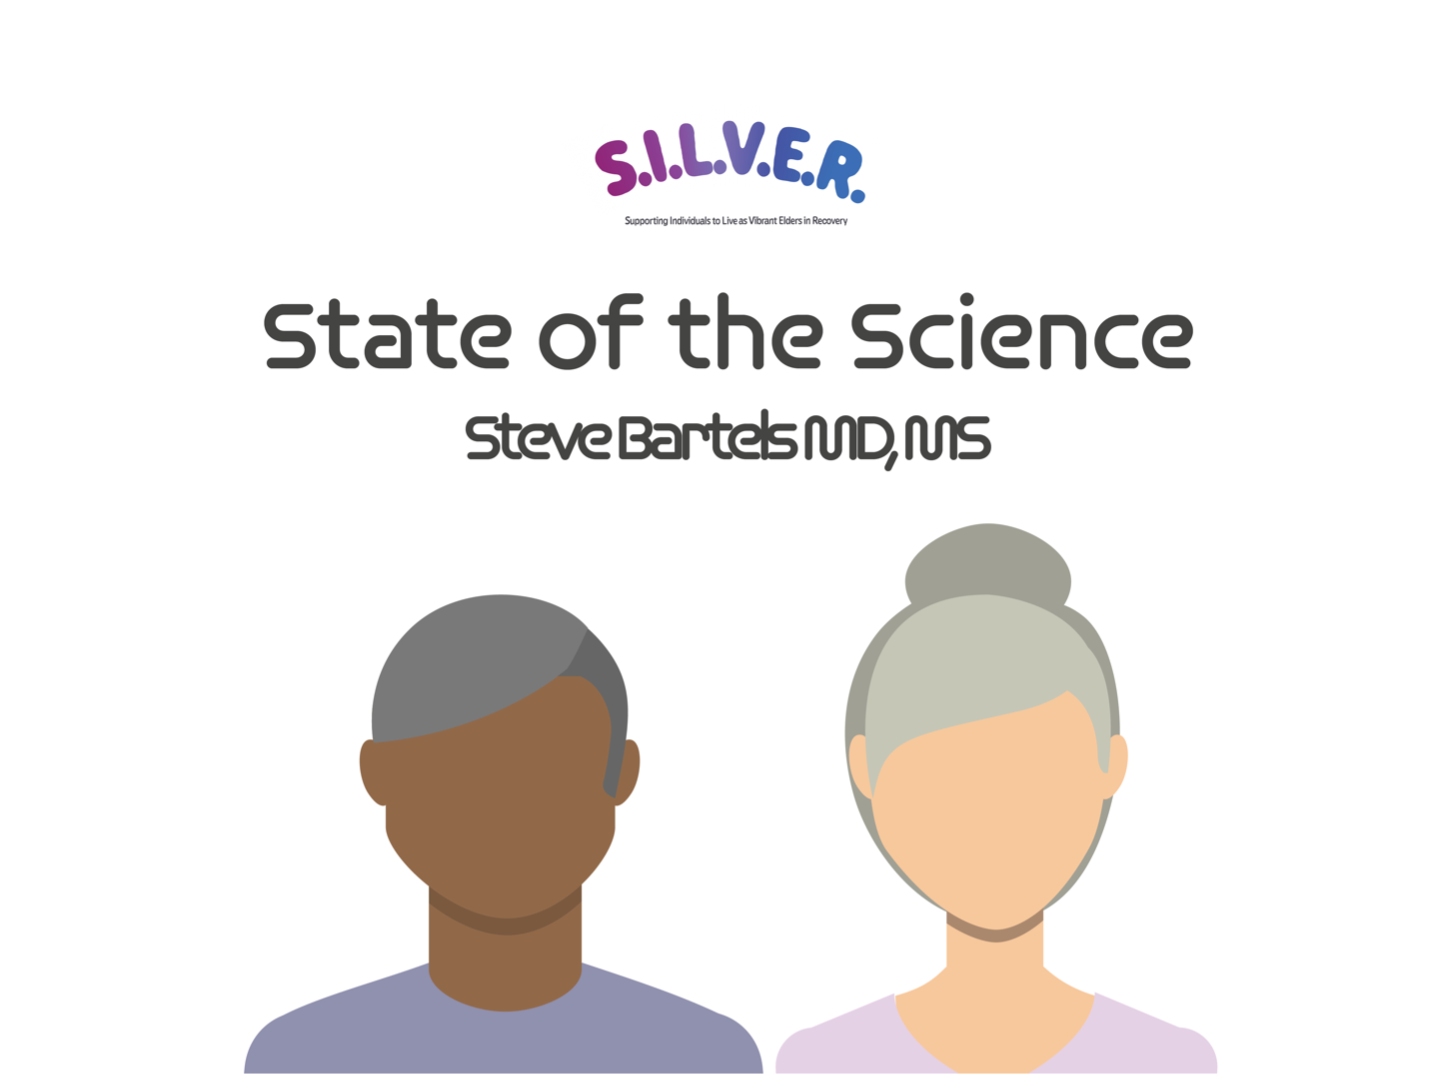 State of the Science: Supporting Elders to Live as Vibrant Elders in Recovery (S.I.L.V.E.R.)